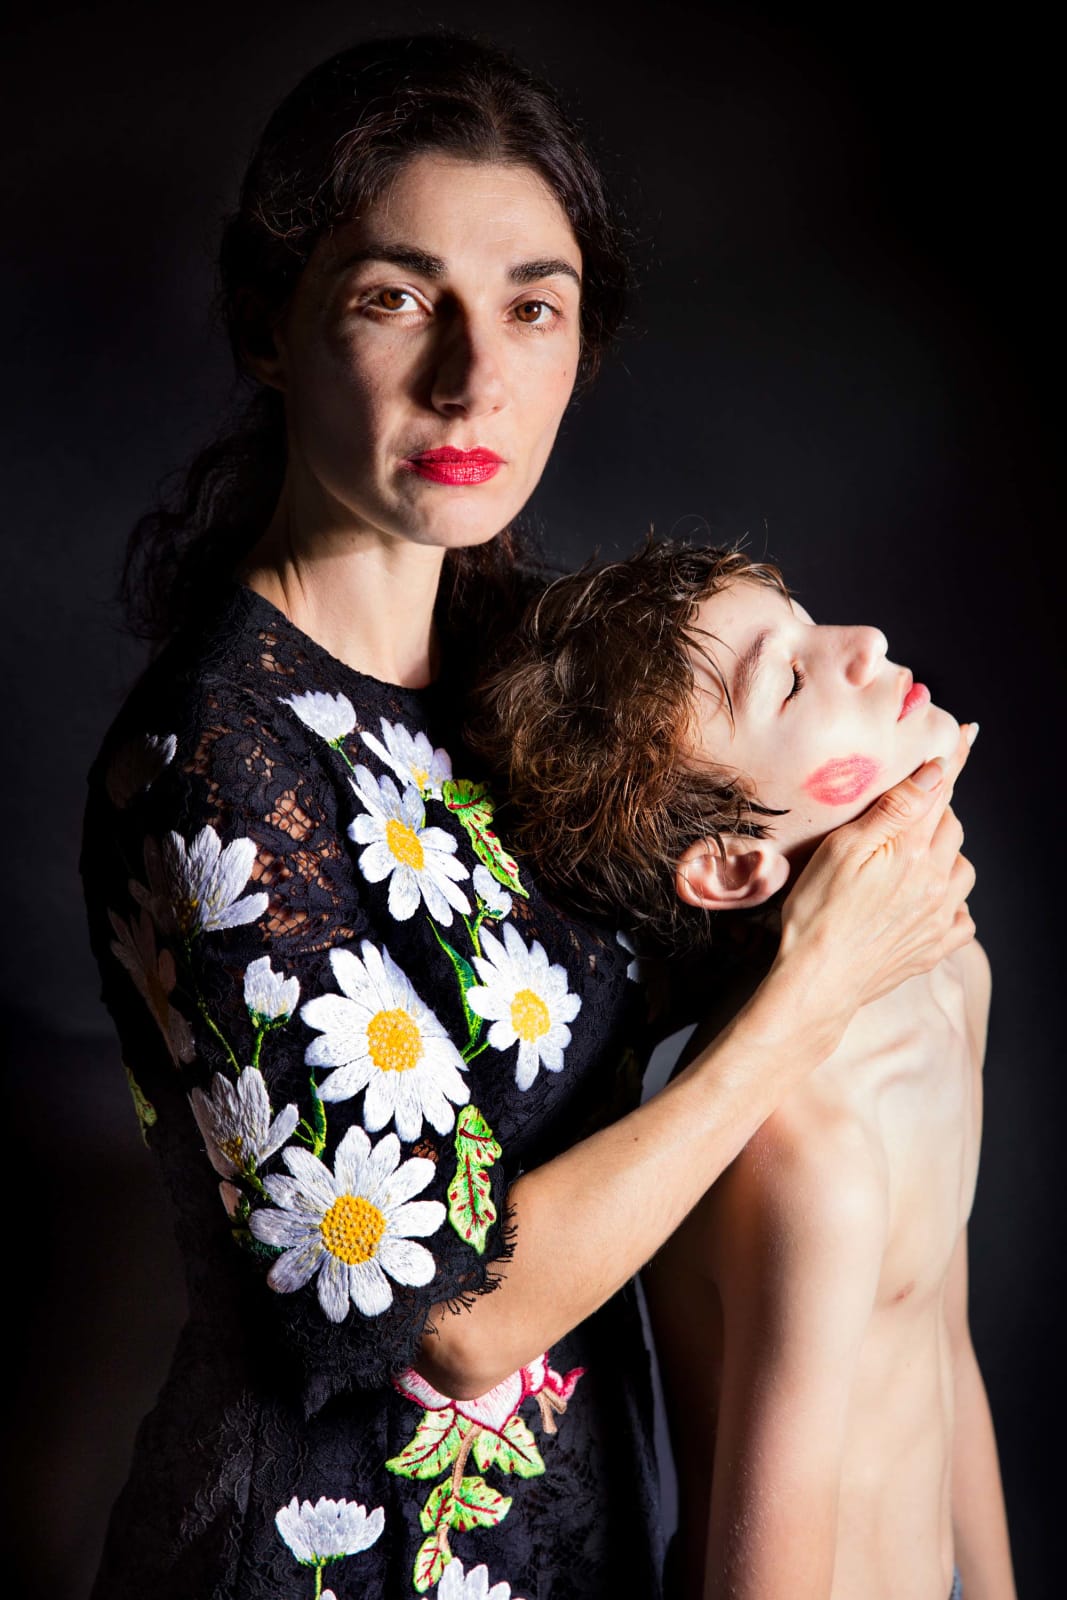 Elinor Carucci photograph of the artist in a dress with daisies with her son